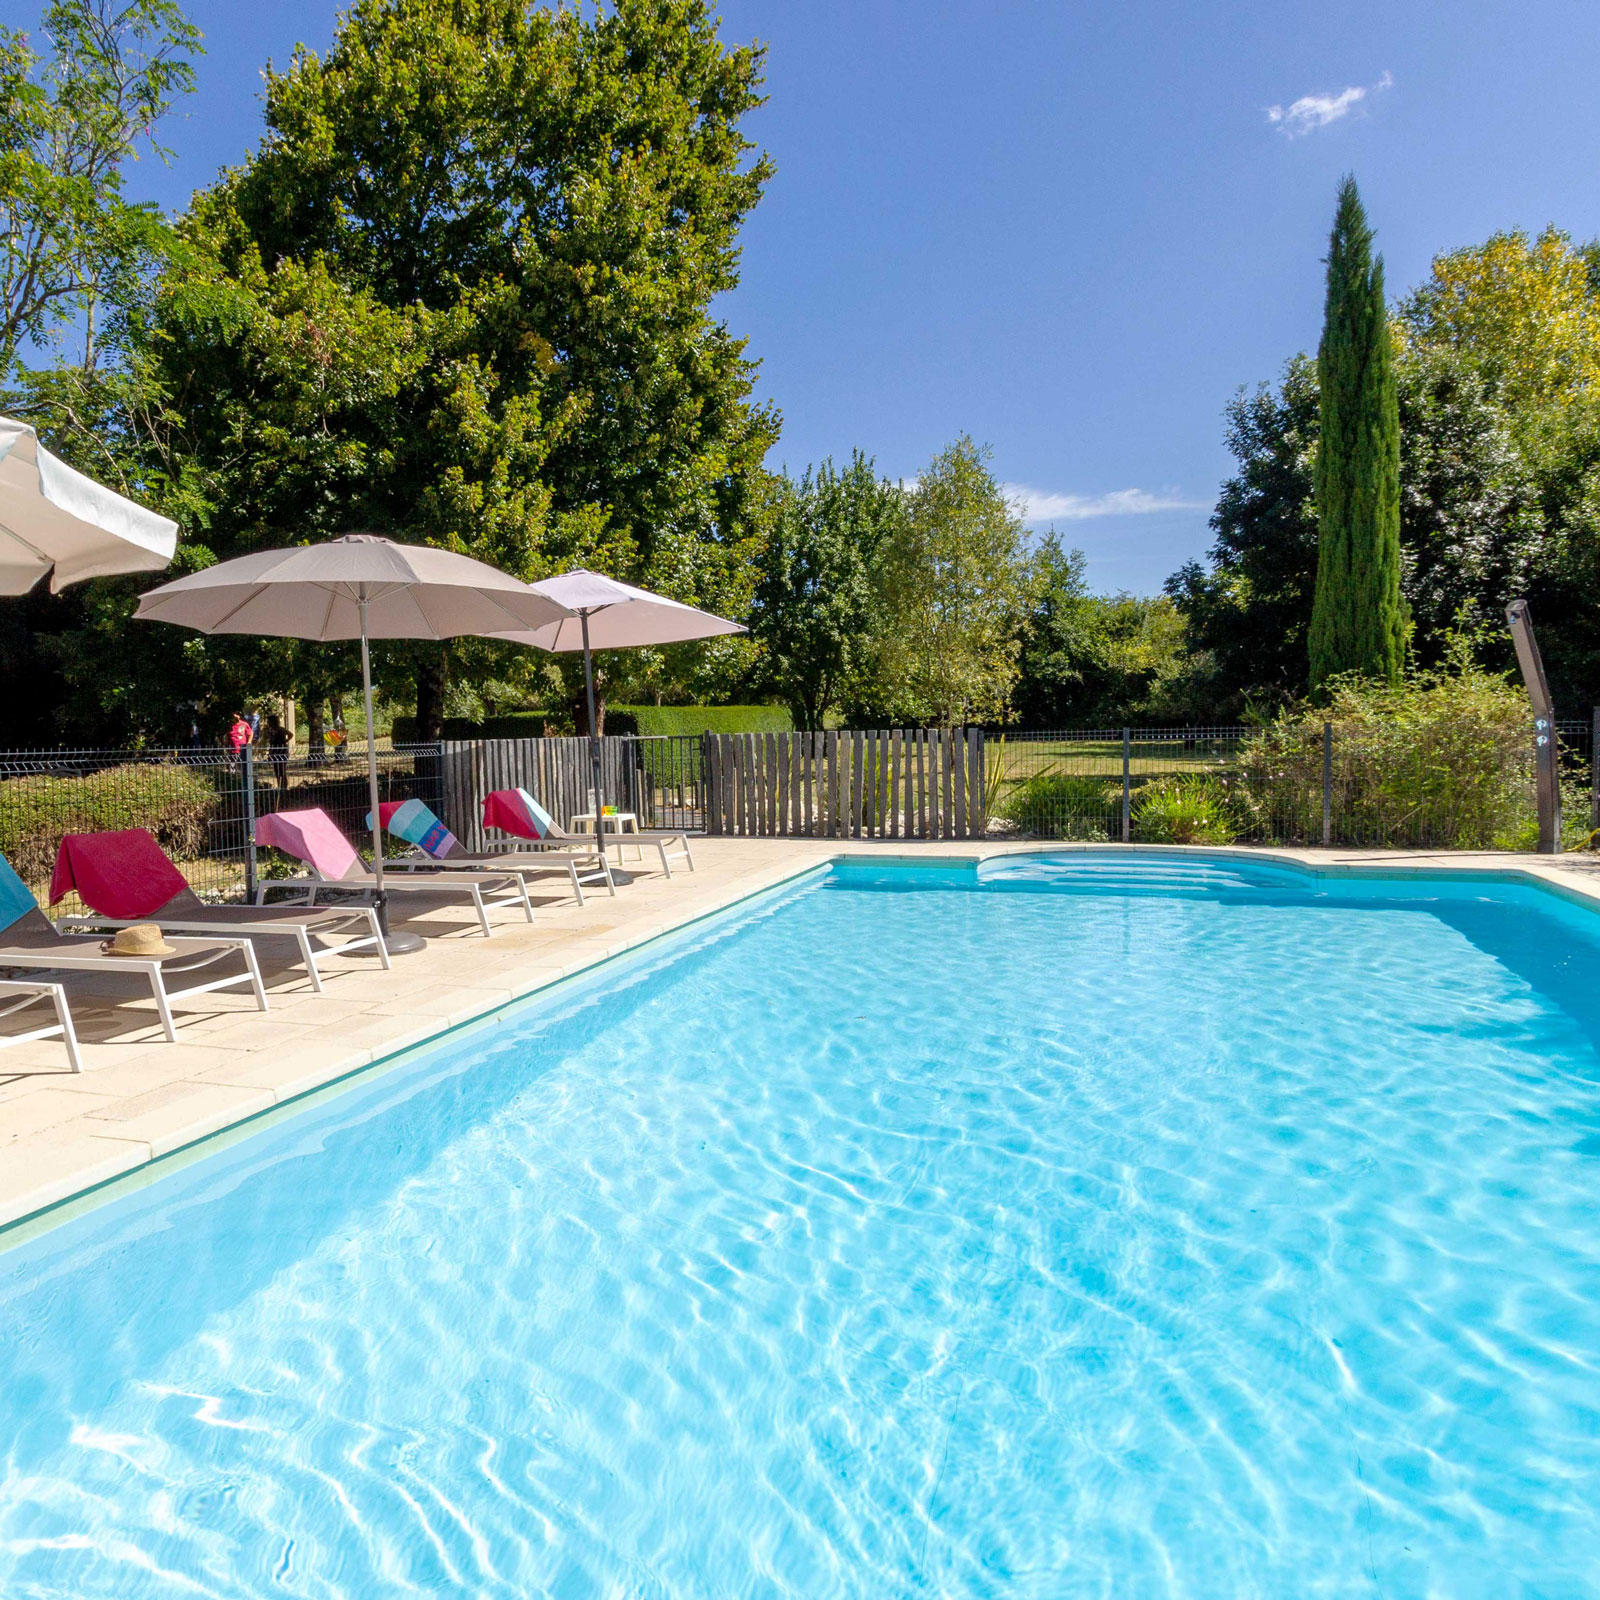 Le Verger holiday villa in SW France with a secure gated private pool near bordeaux, Bergerac south west france